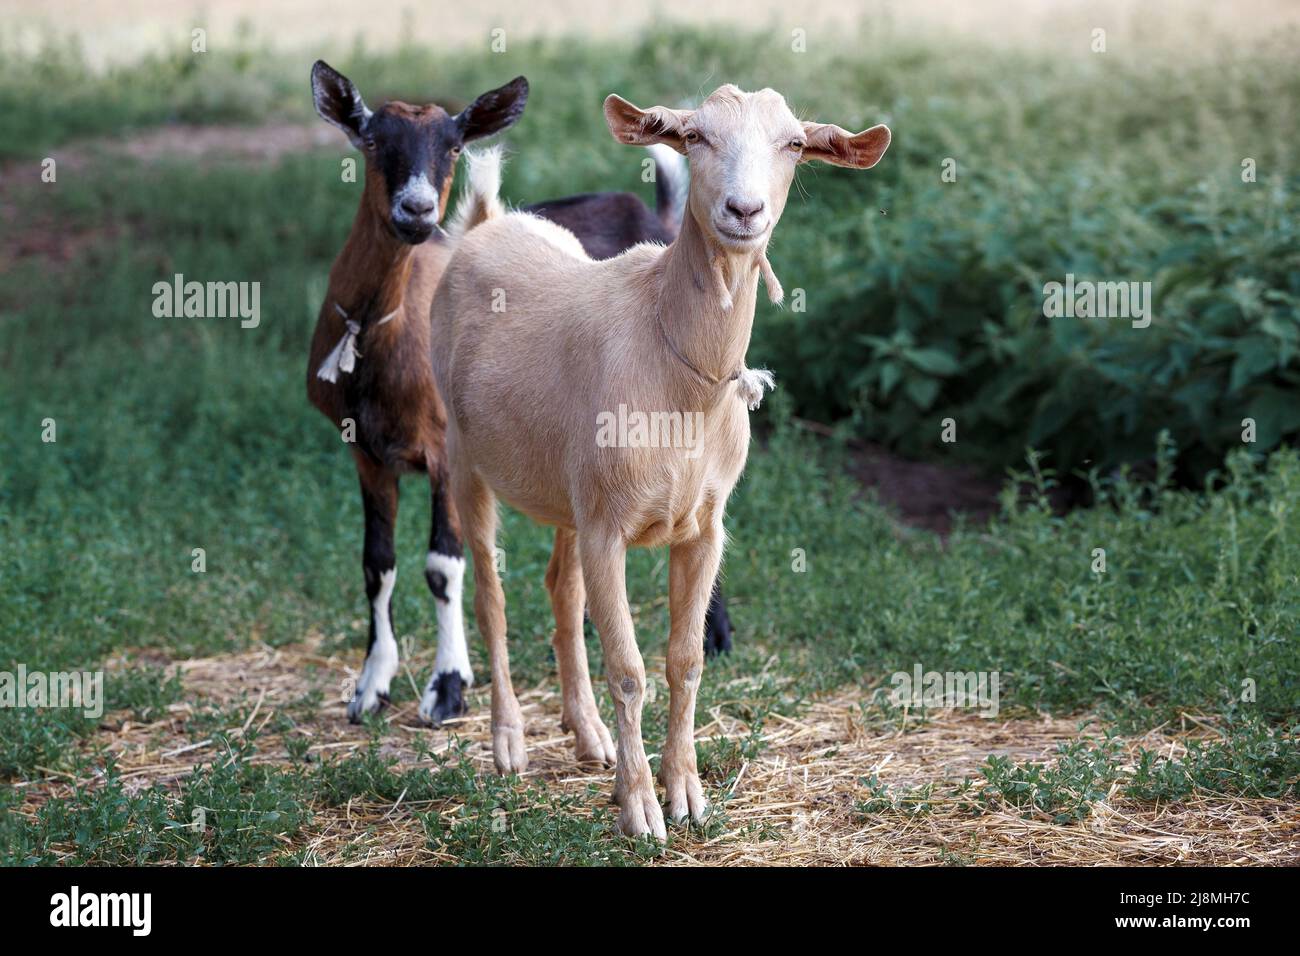 The goats were interested in the photographer, they are careful. Horizontal photo. Stock Photo